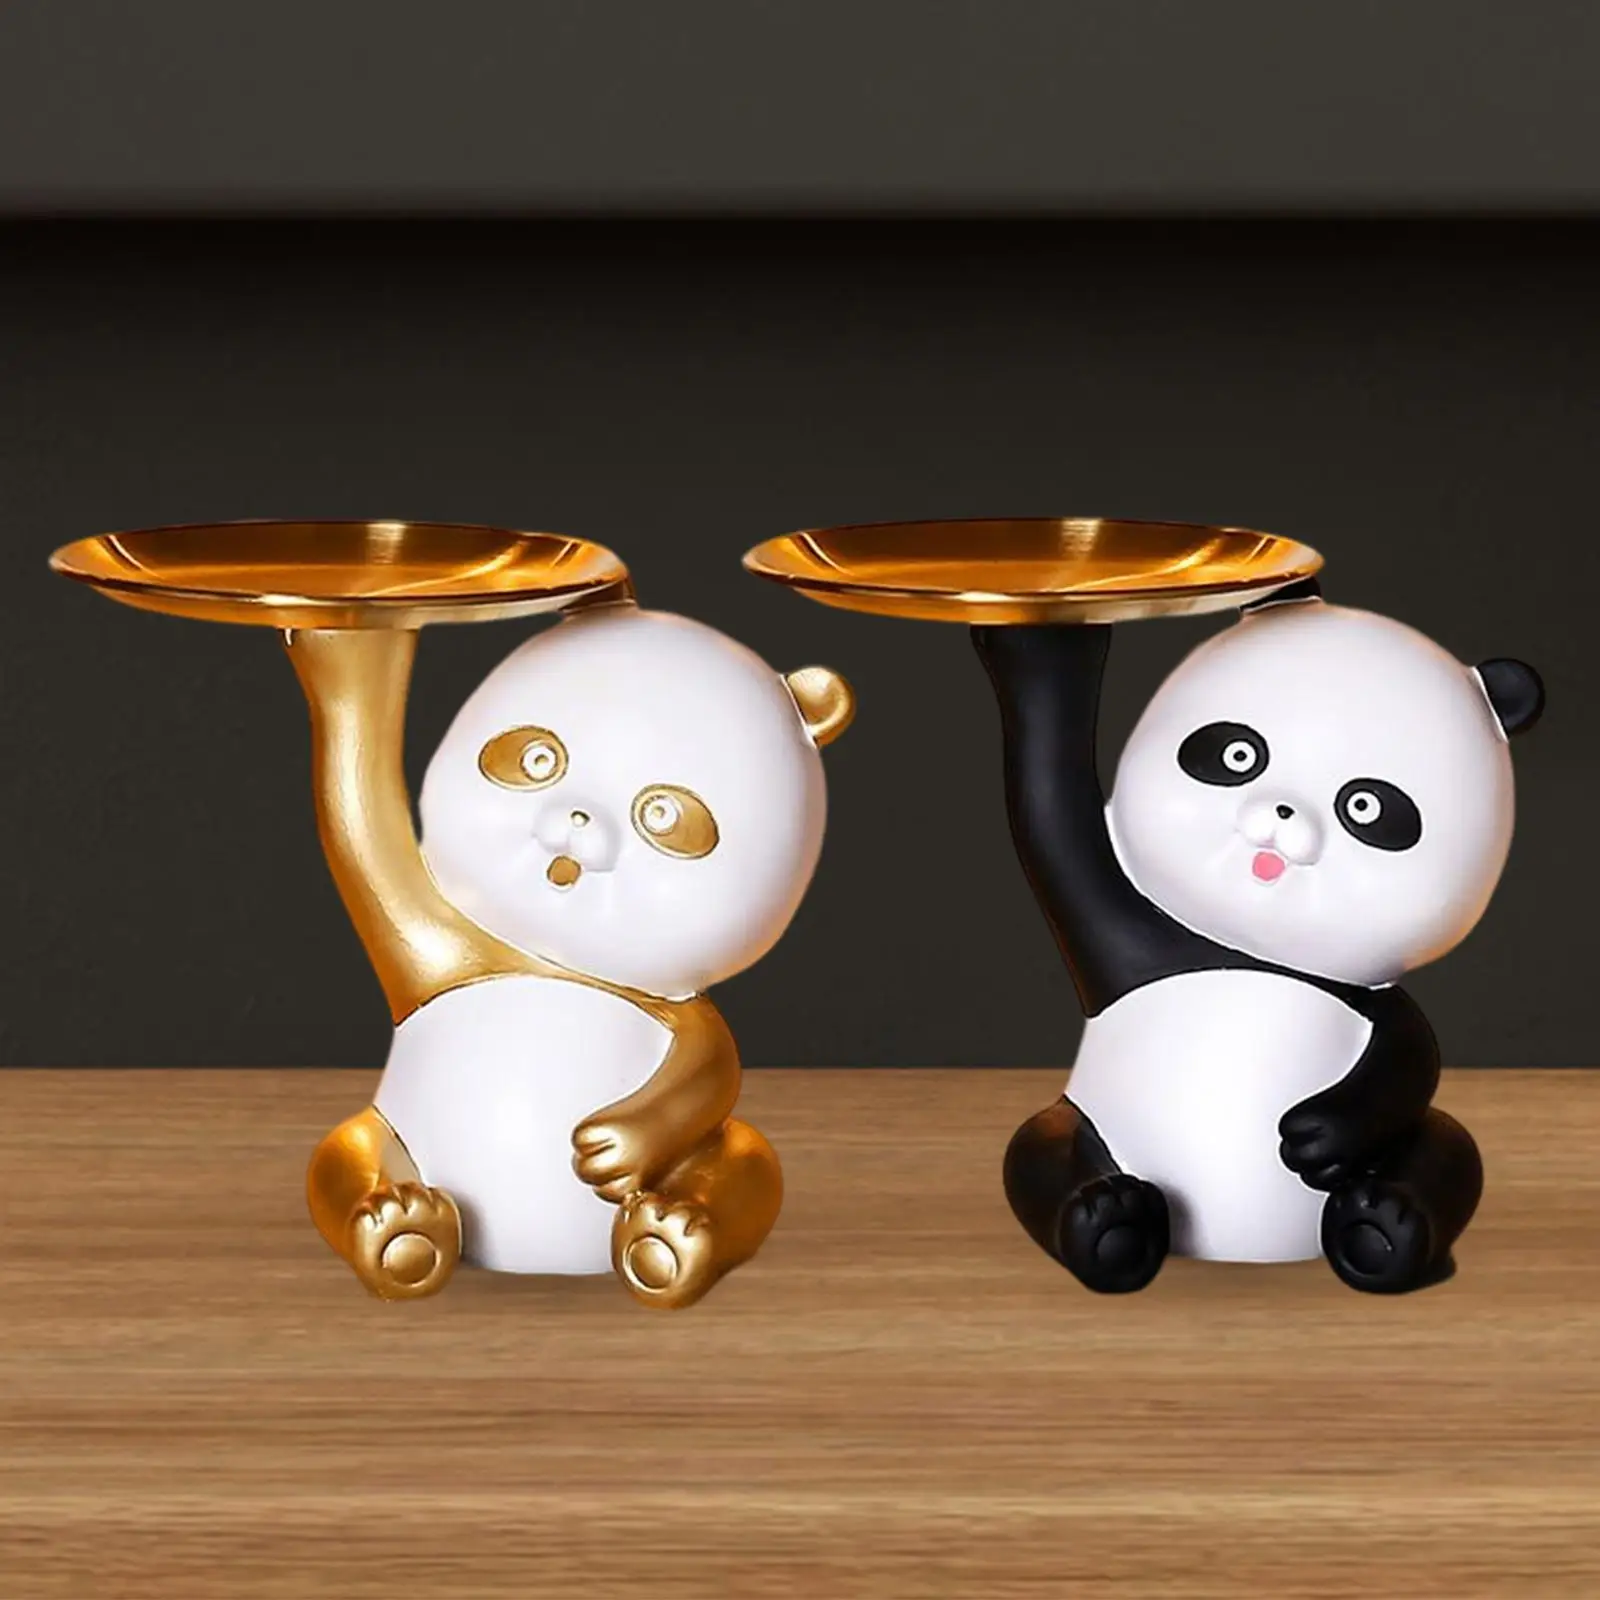 Multifunction Panda Sculpture with Storage Tray for Entrance Decoration